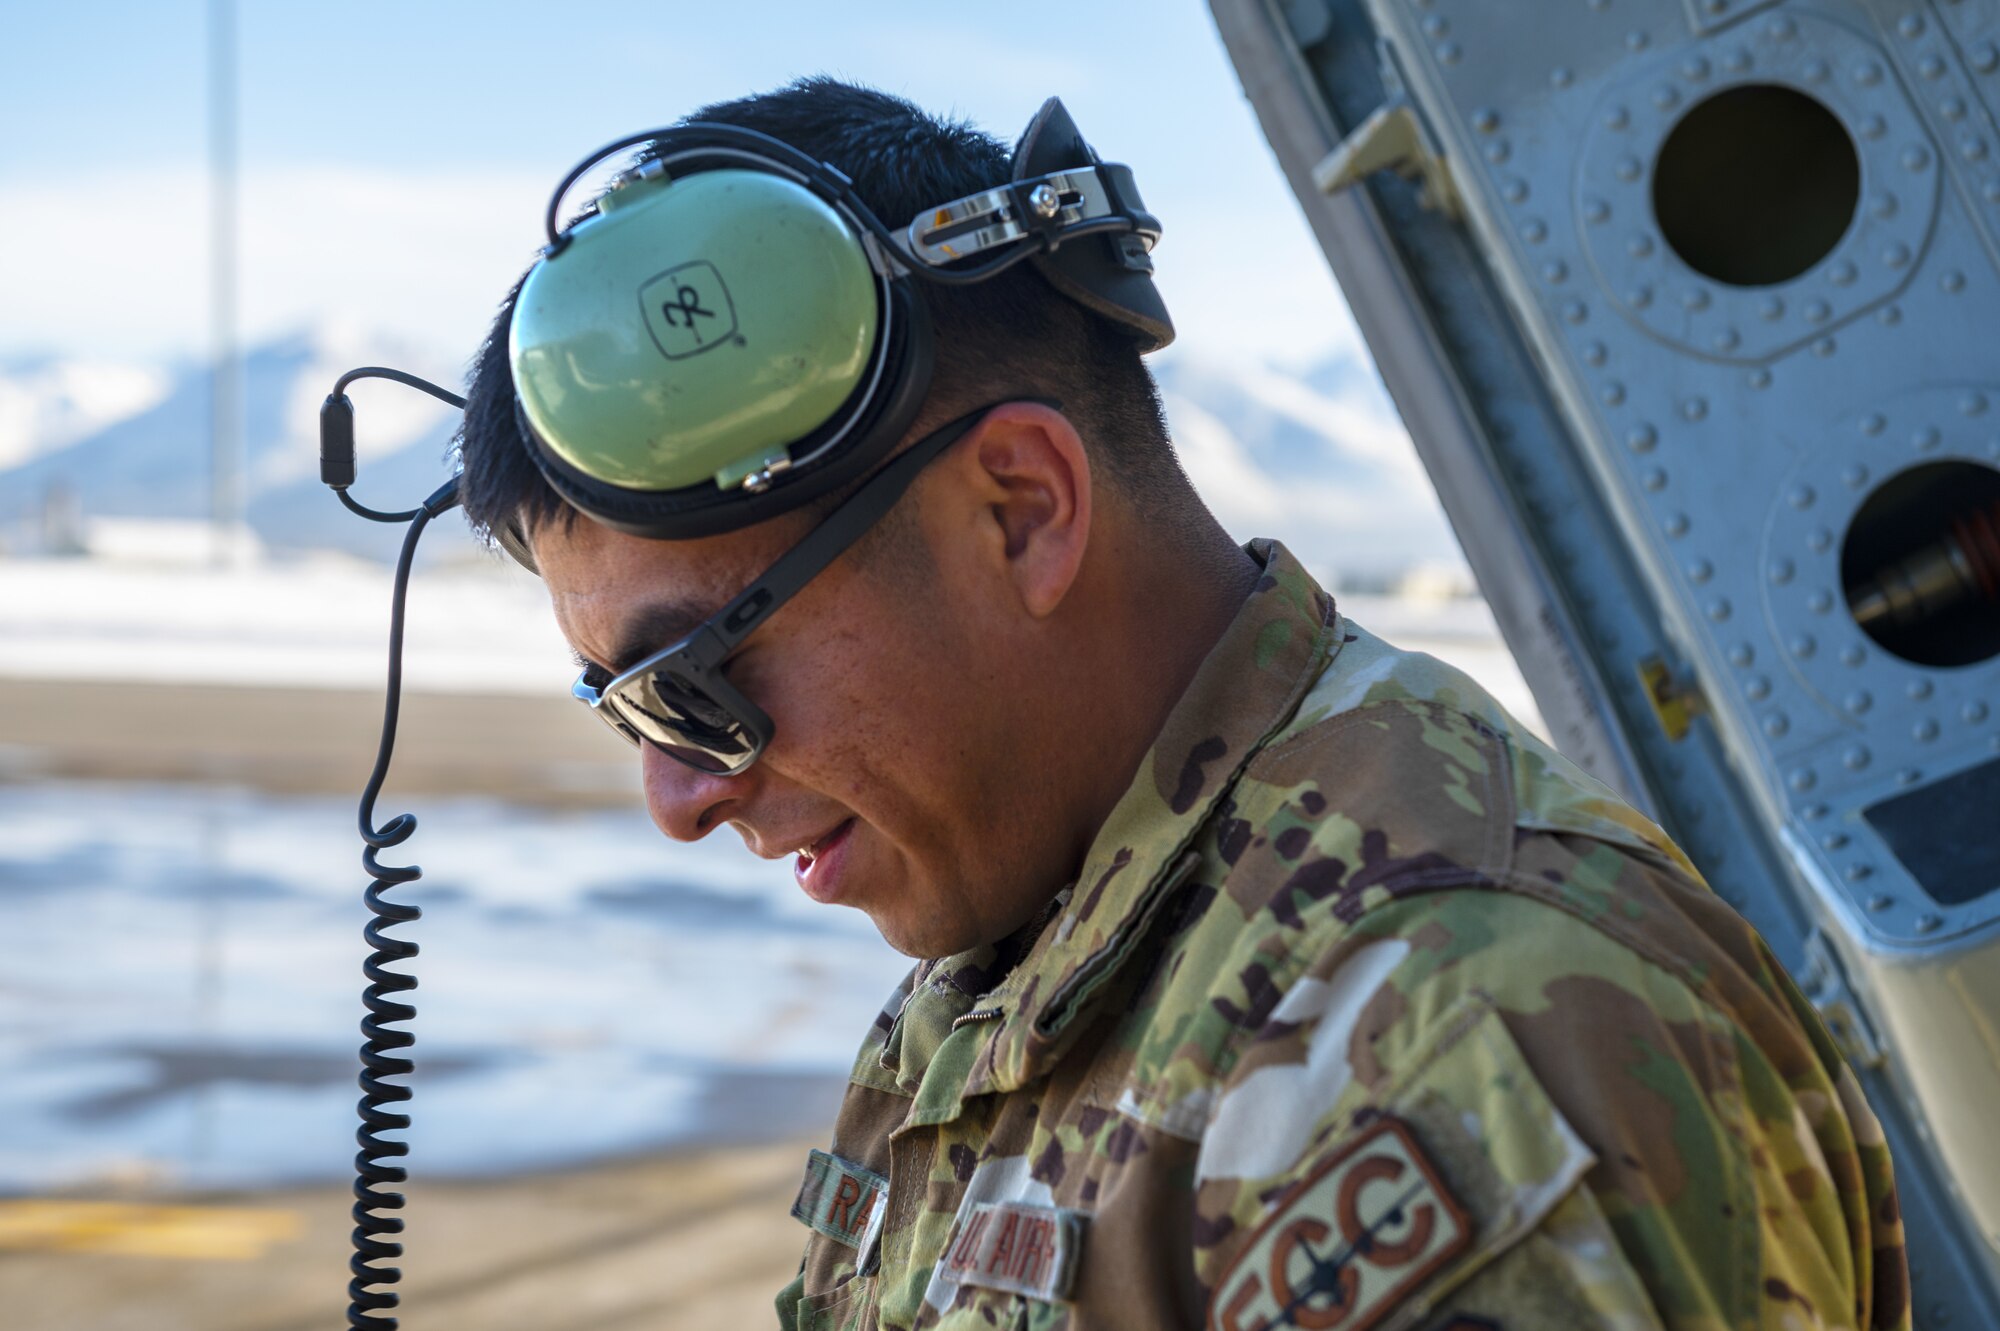 U.S. Air Force Tech. Sgt. Max Ramos, 92nd Aircraft Maintenance Squadron flying crew chief, prepares to perform a post-flight inspection following a mission at Eielson Air Force Base, Alaska, March 7, 2023. Aircrew from the 384th Air Refueling Squadron conducted an air refueling coronet with Marines from the Marine Fighter Attack Squadron 312, demonstrating the critical role mobility forces have in projecting the joint force anywhere, anytime. (U.S. Air Force photo by Staff Sgt. Lawrence Sena)